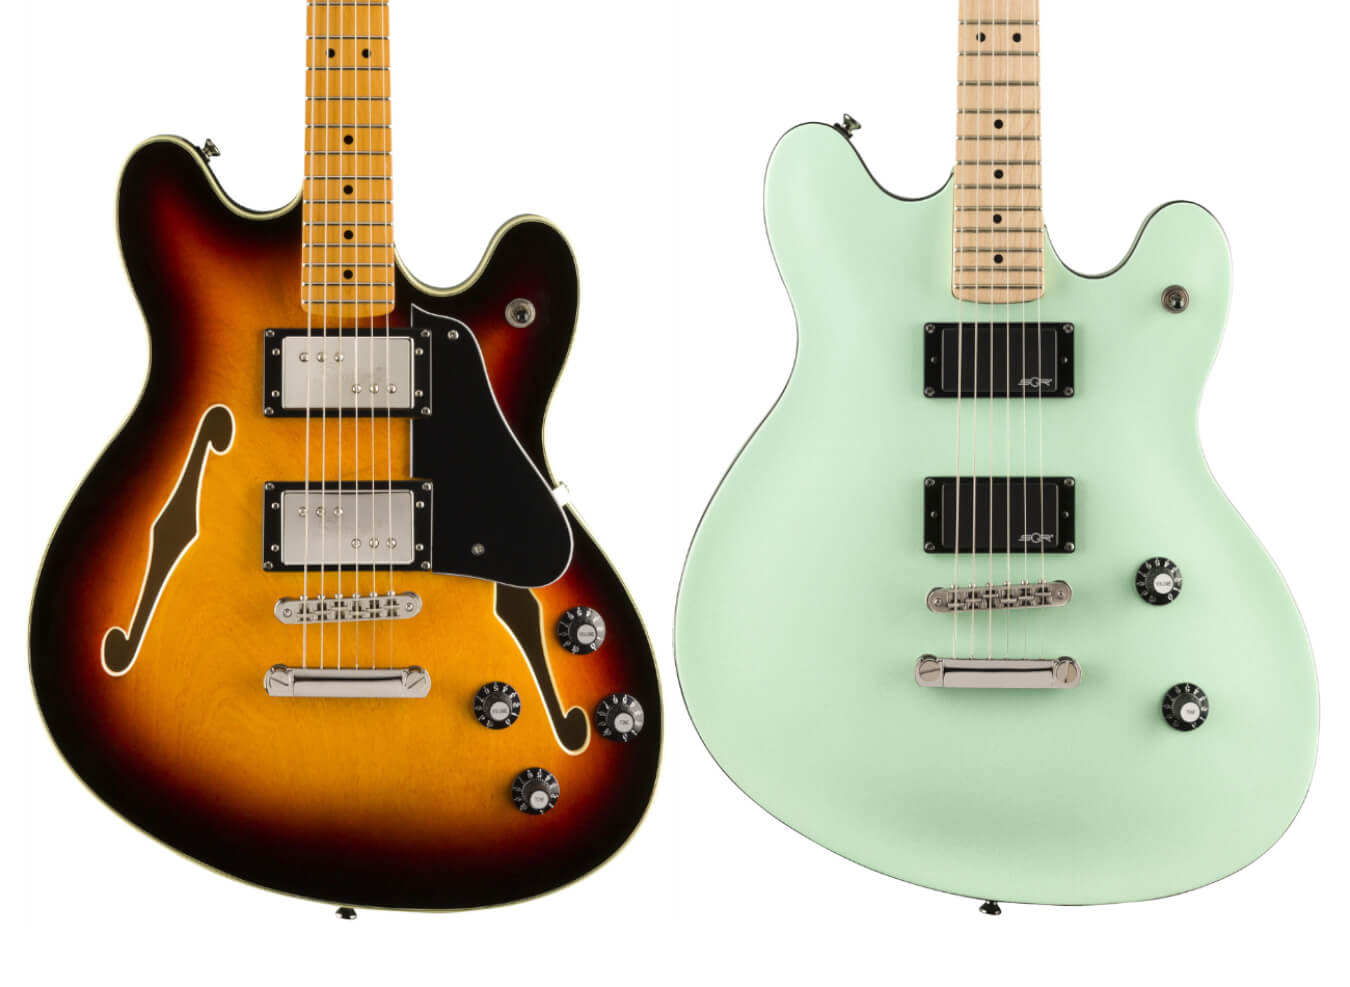 Summer NAMM 2019: Squier makes the Starcaster more affordable than